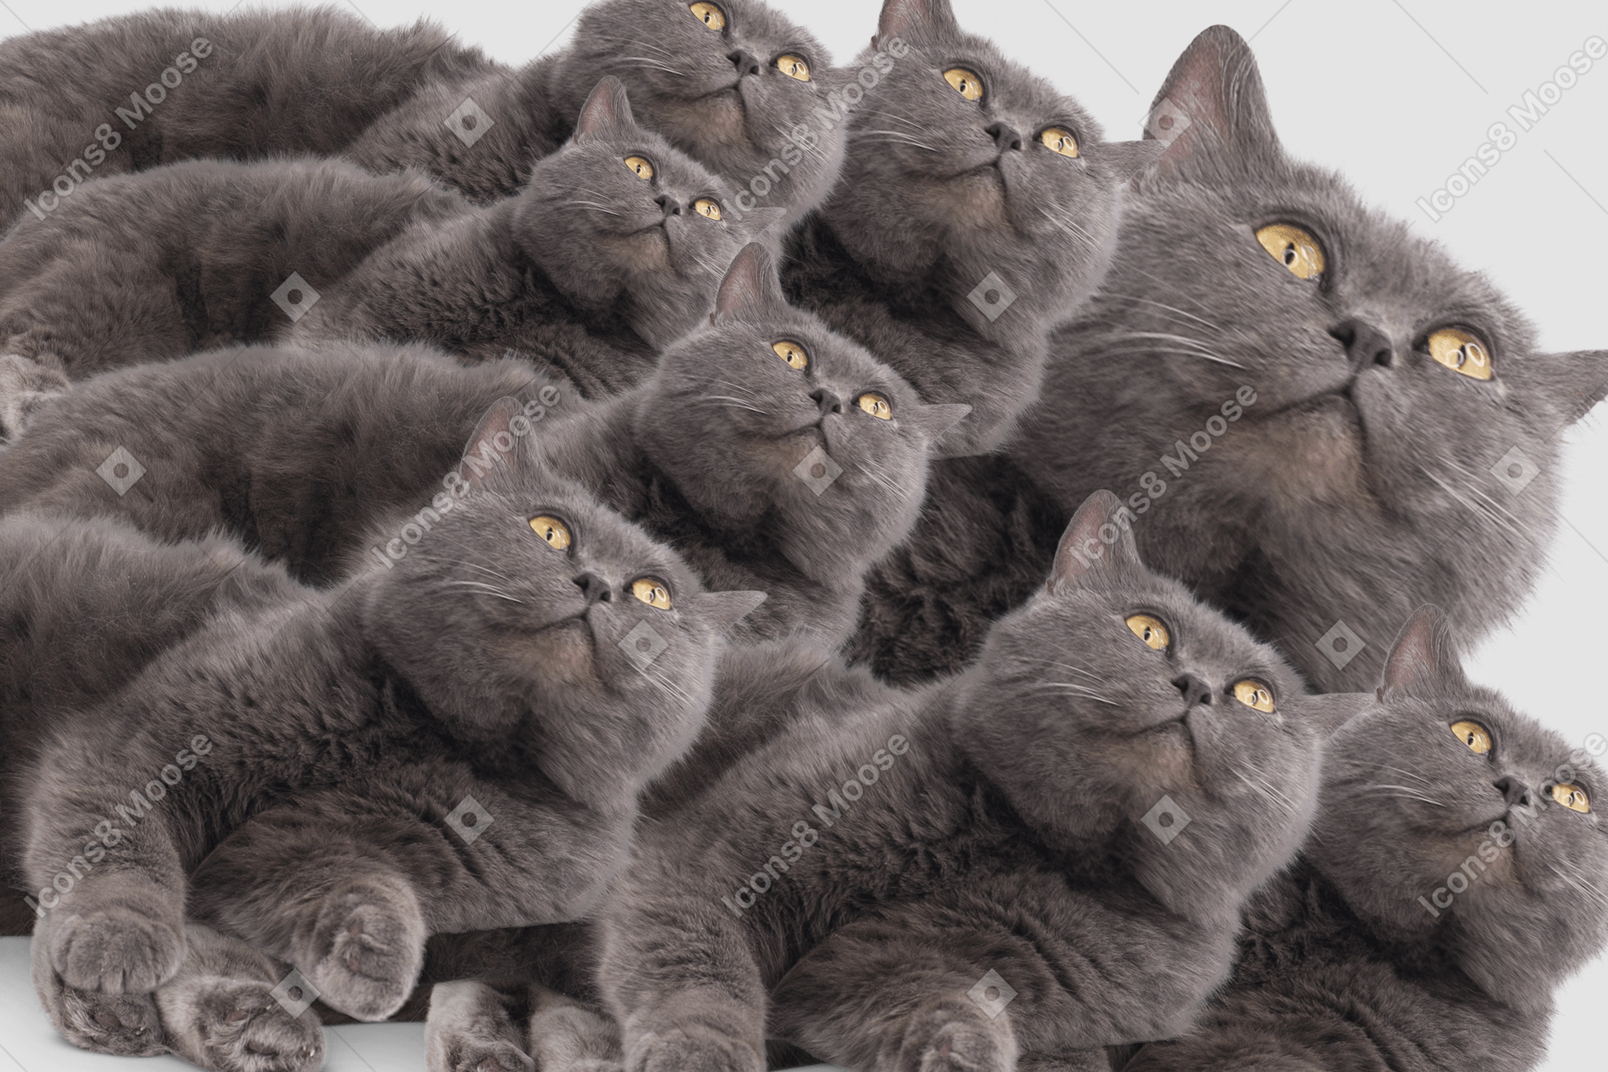 A group of grey cats